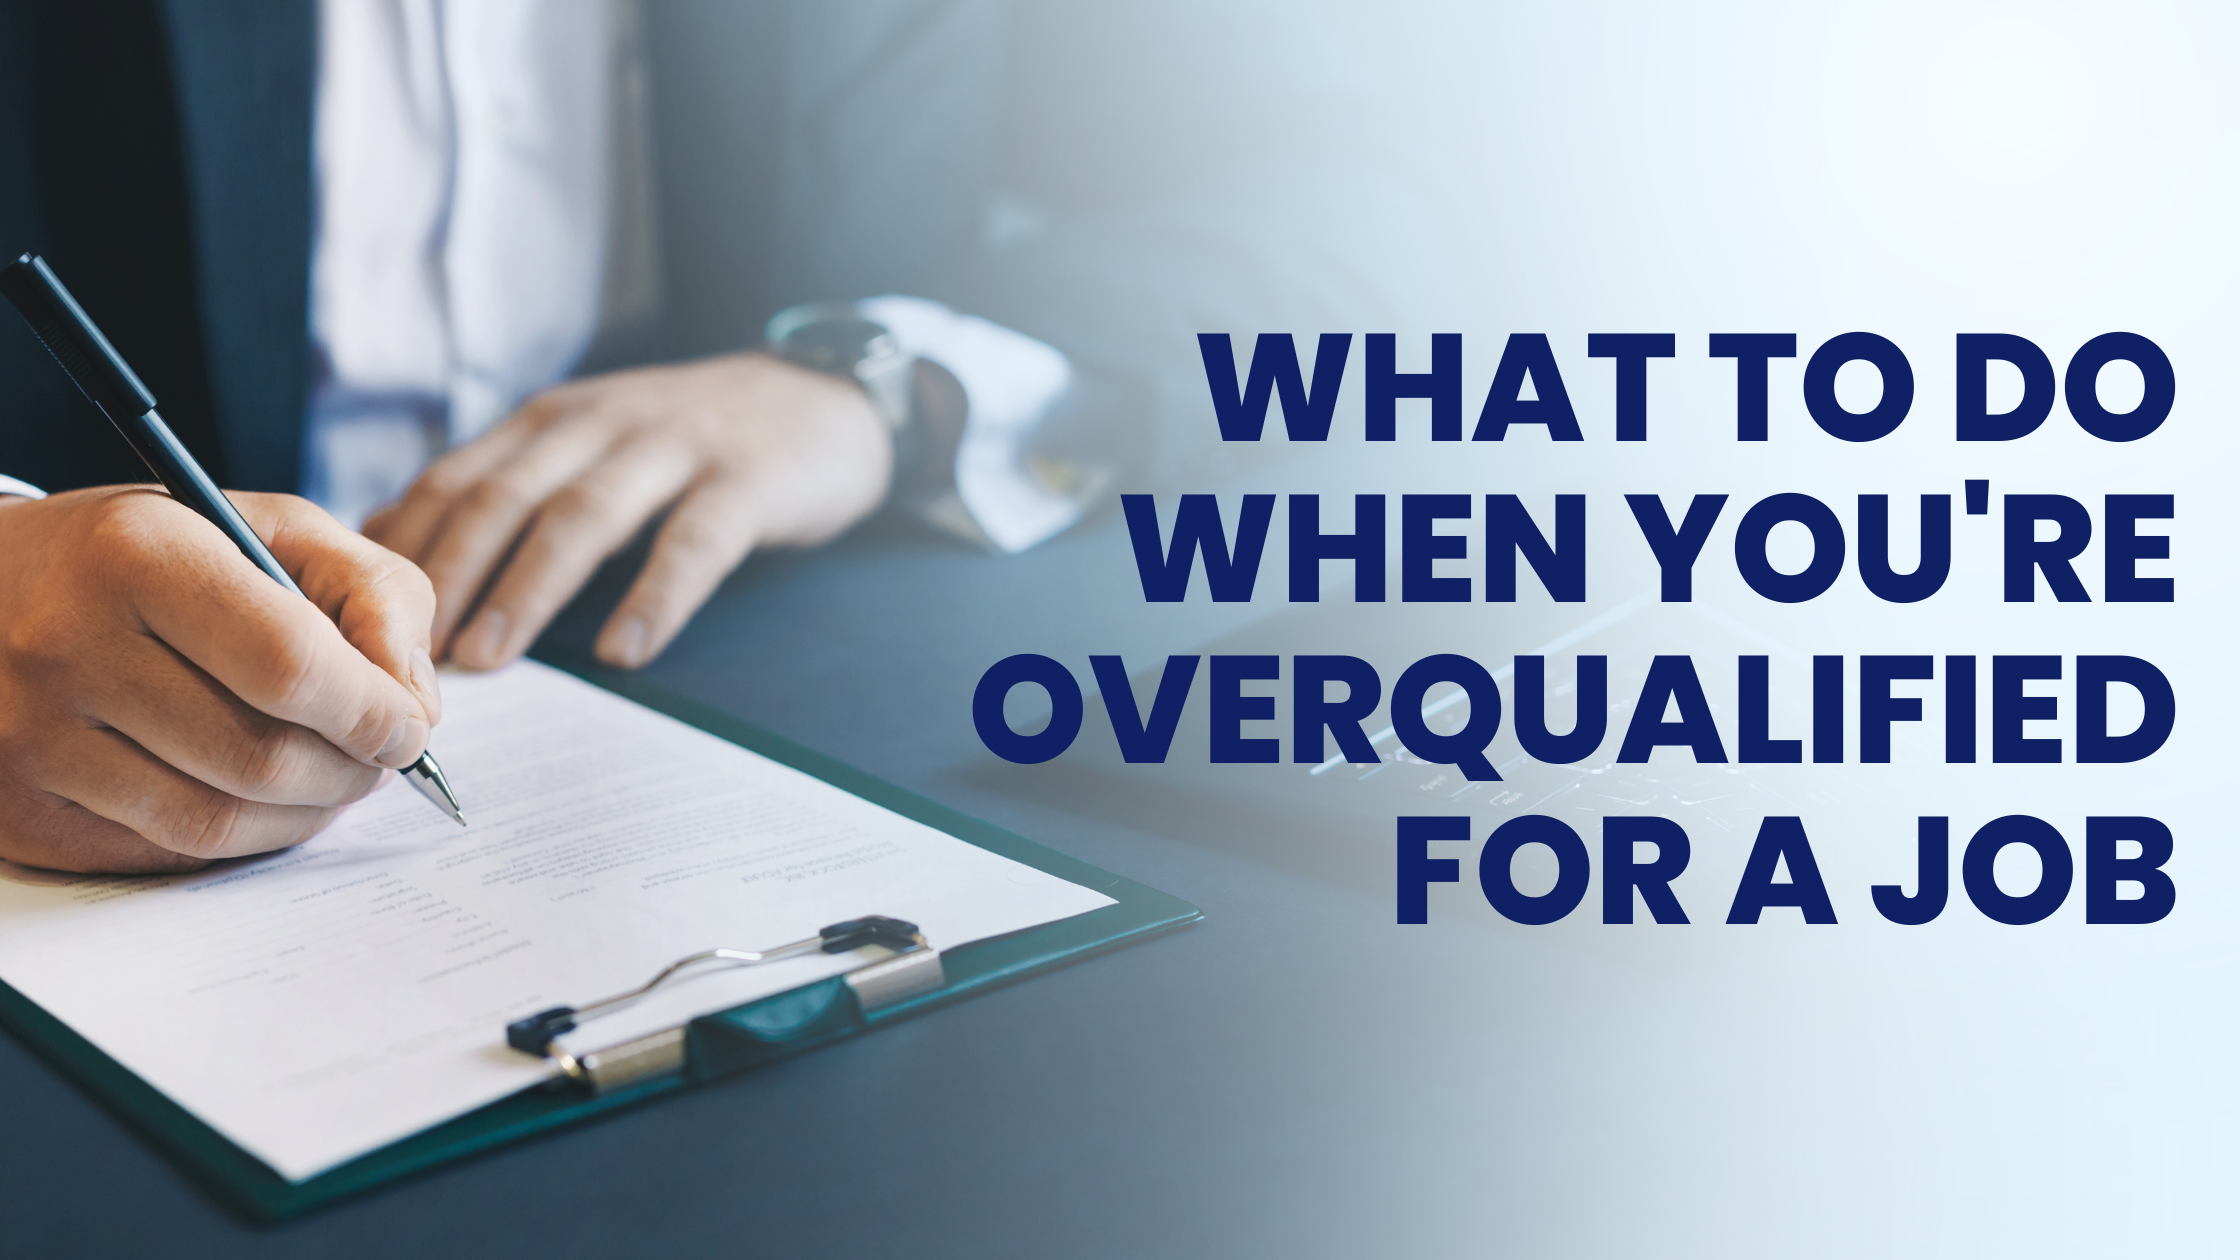 What to Do When You're Overqualified for a Job